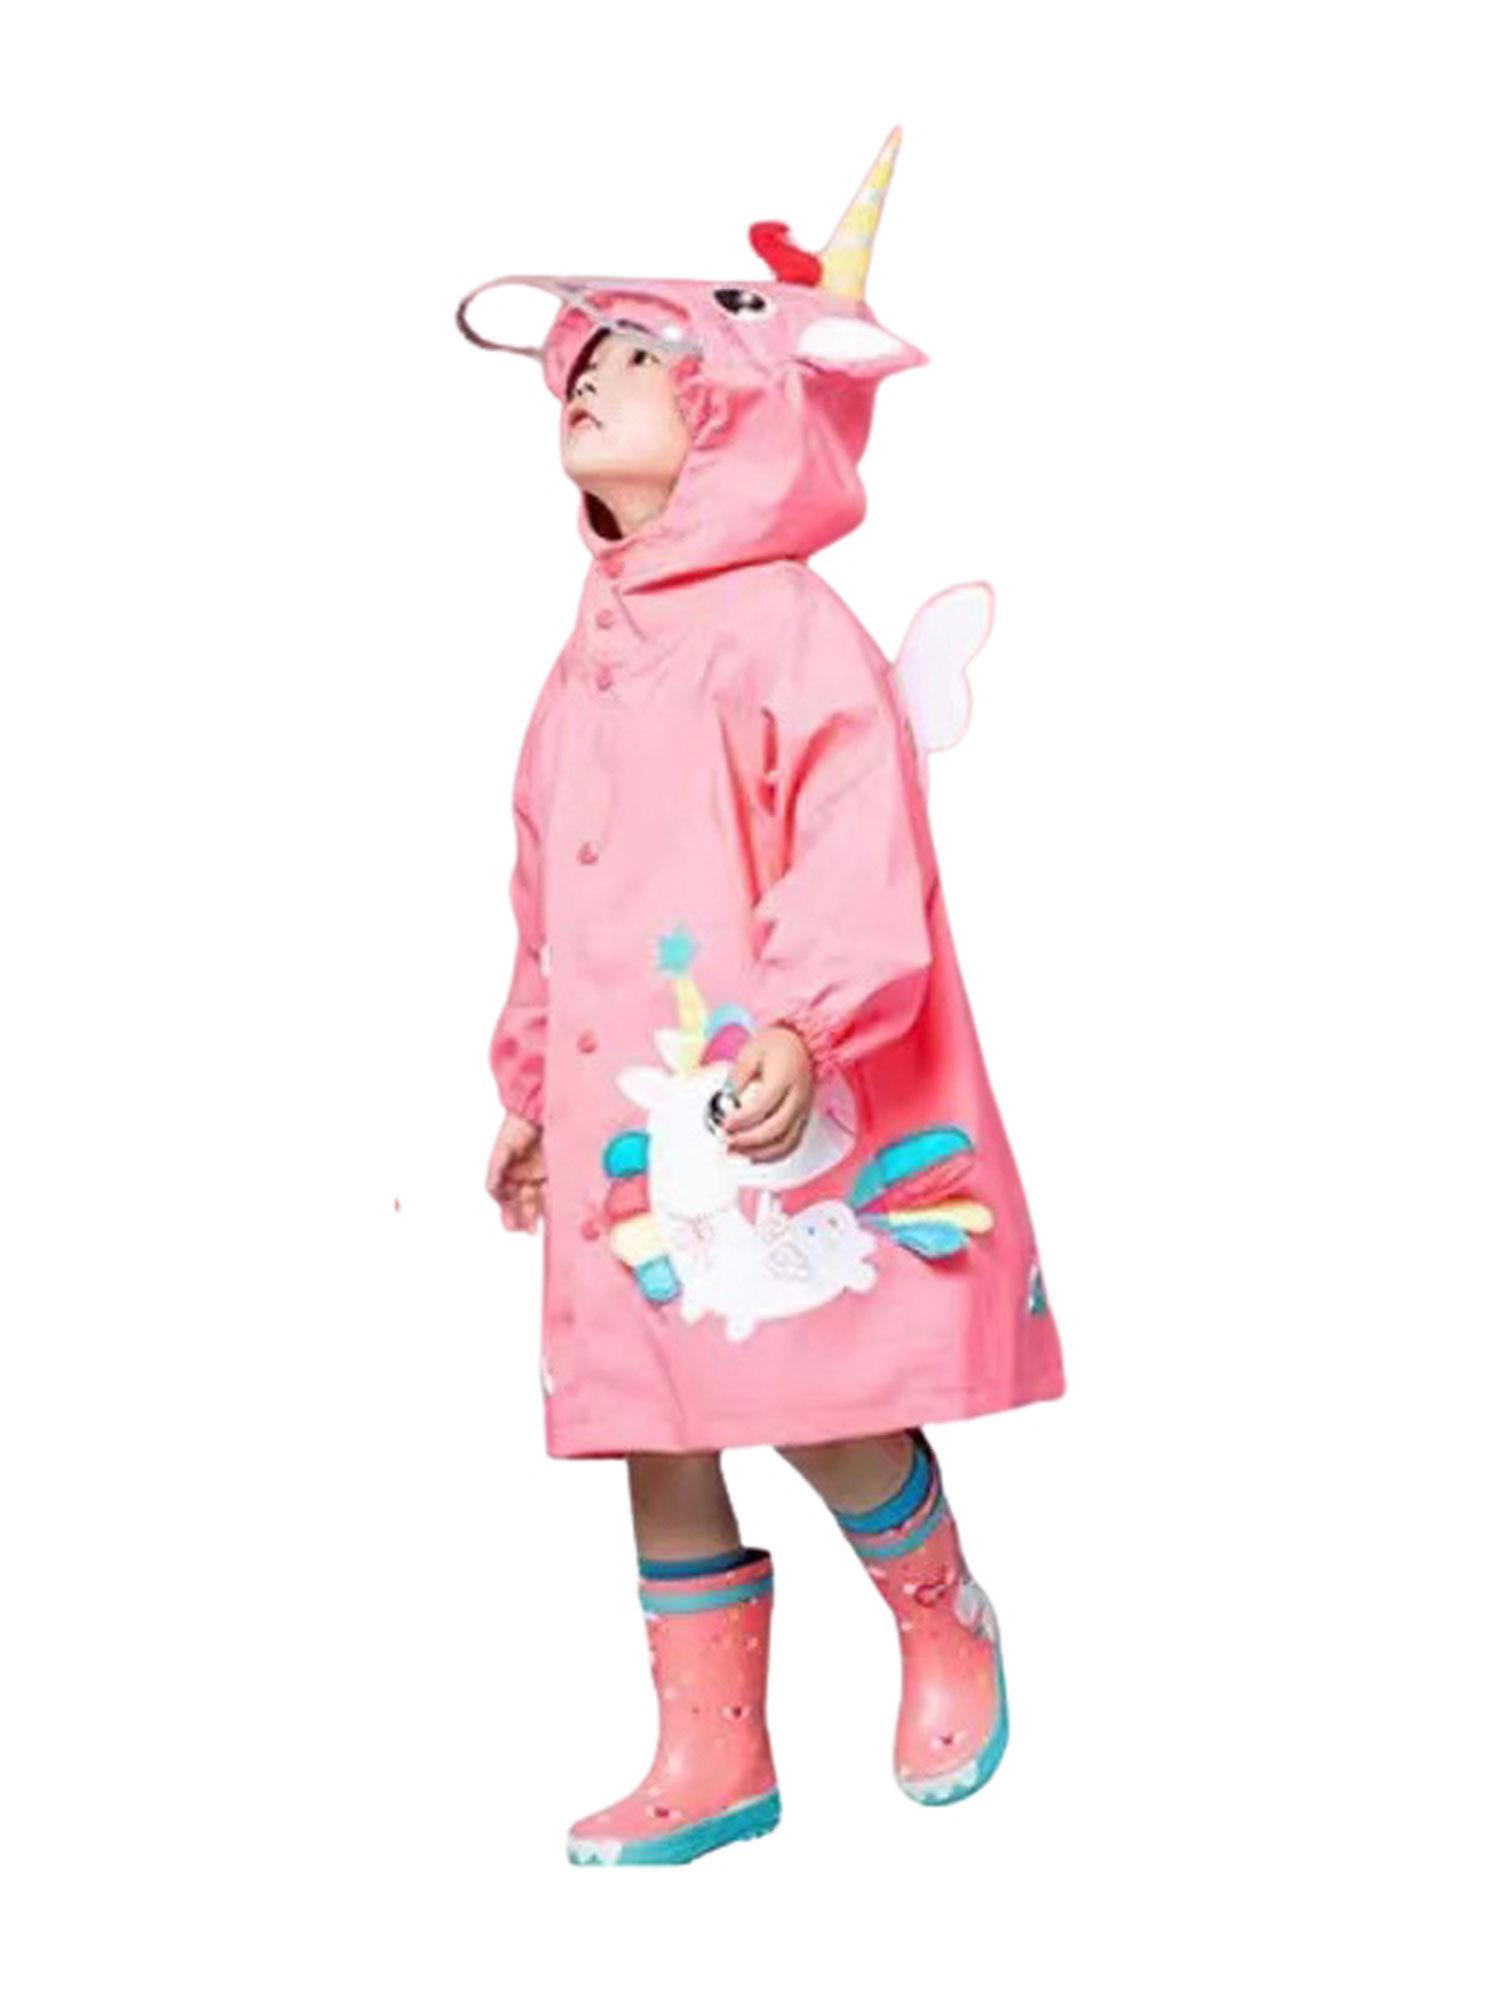 all-over-raincoat-for-kids-bright-pink-magical-unicorn-theme